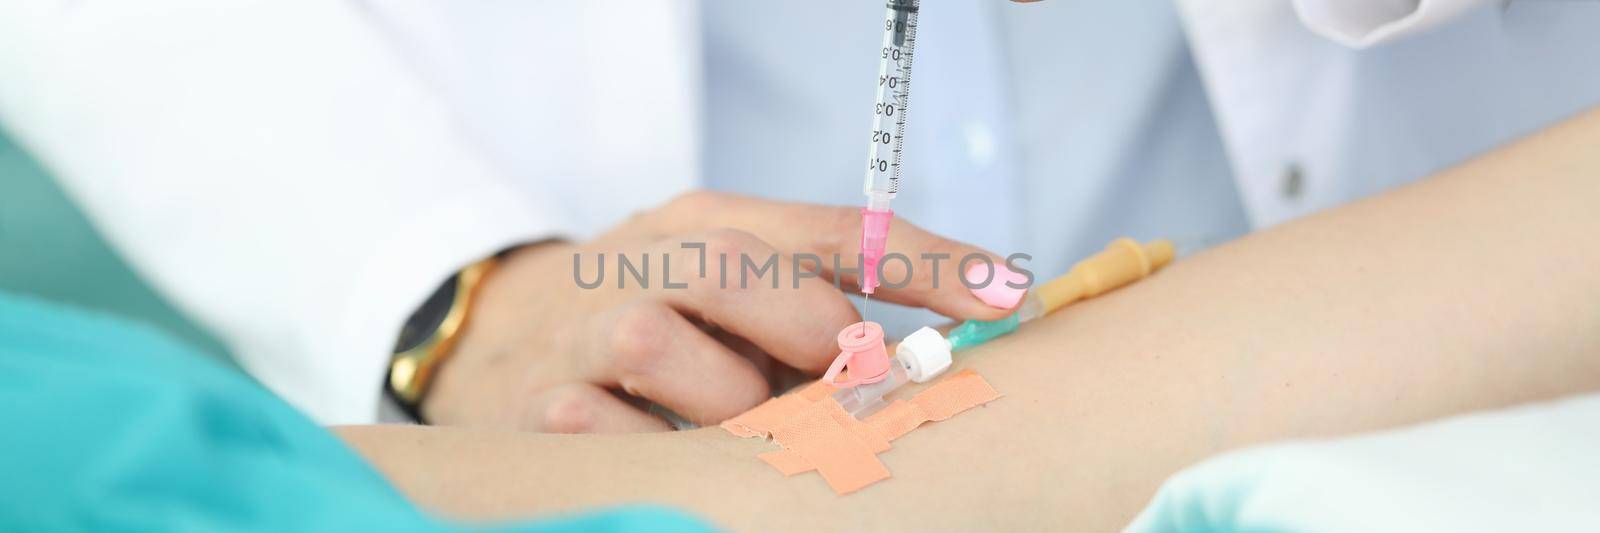 Doctors hands place dropper in patients hand. Withdrawal from body substances that change consciousness. Sterility drugs for injection into vein. Drug entry through vein. Infusion medication